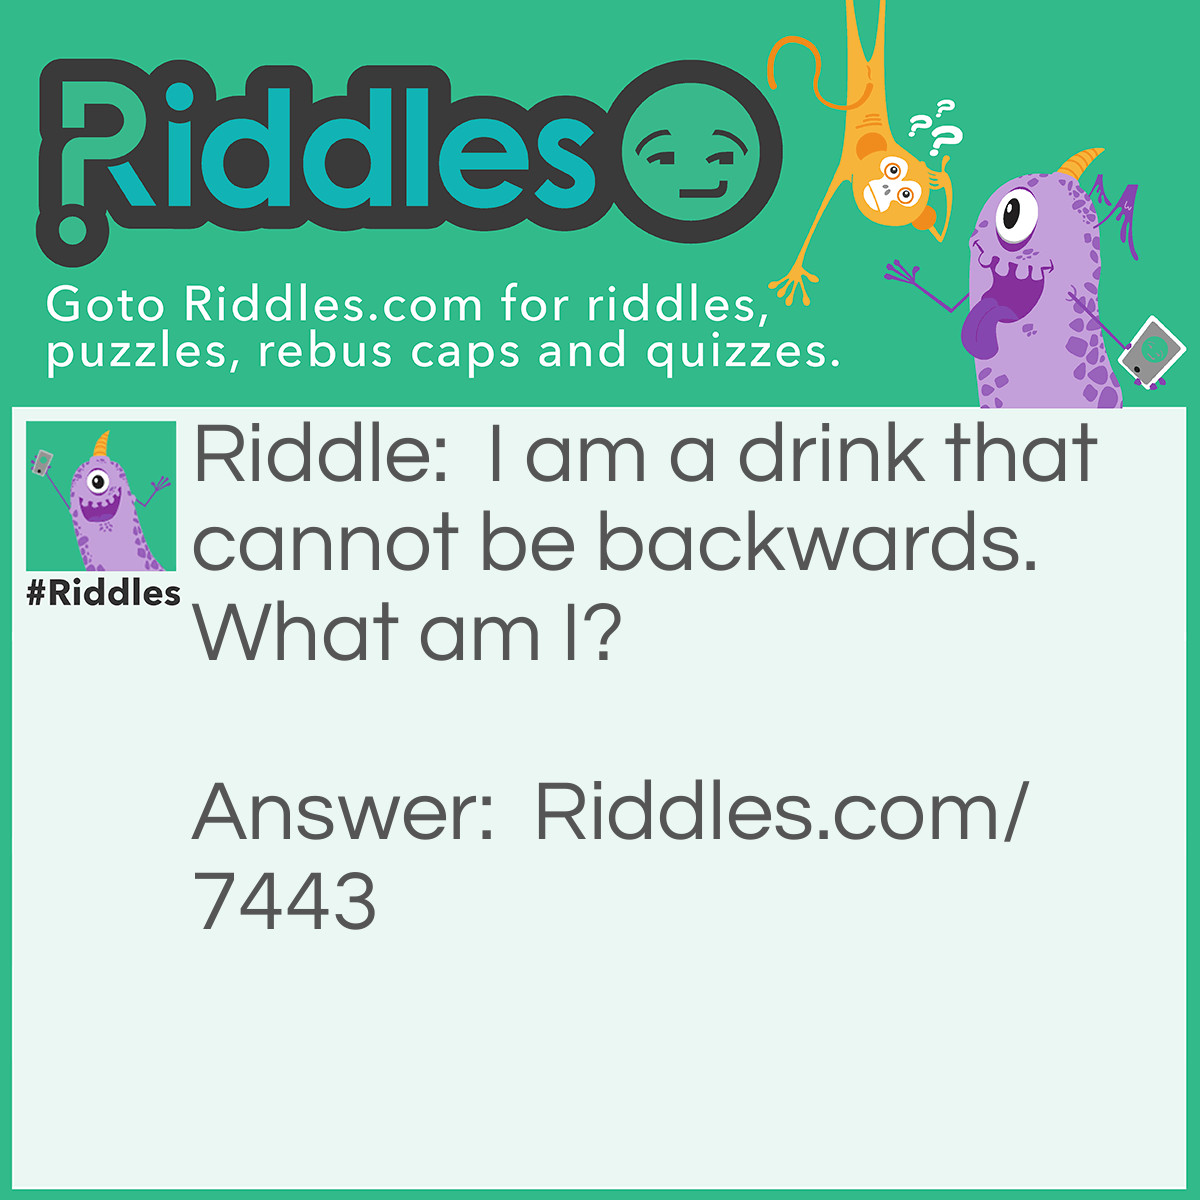 Riddle: I am a drink that cannot be backwards. What am I? Answer: "Tonic" - Reasoning: Simply put, the riddle does not give you much. Backwards is the key, which suggests the reader look at something in reverse, namely the word "cannot". Cannot backwards spells "tonnac", which when read aloud sounds extremely close to "tonic".